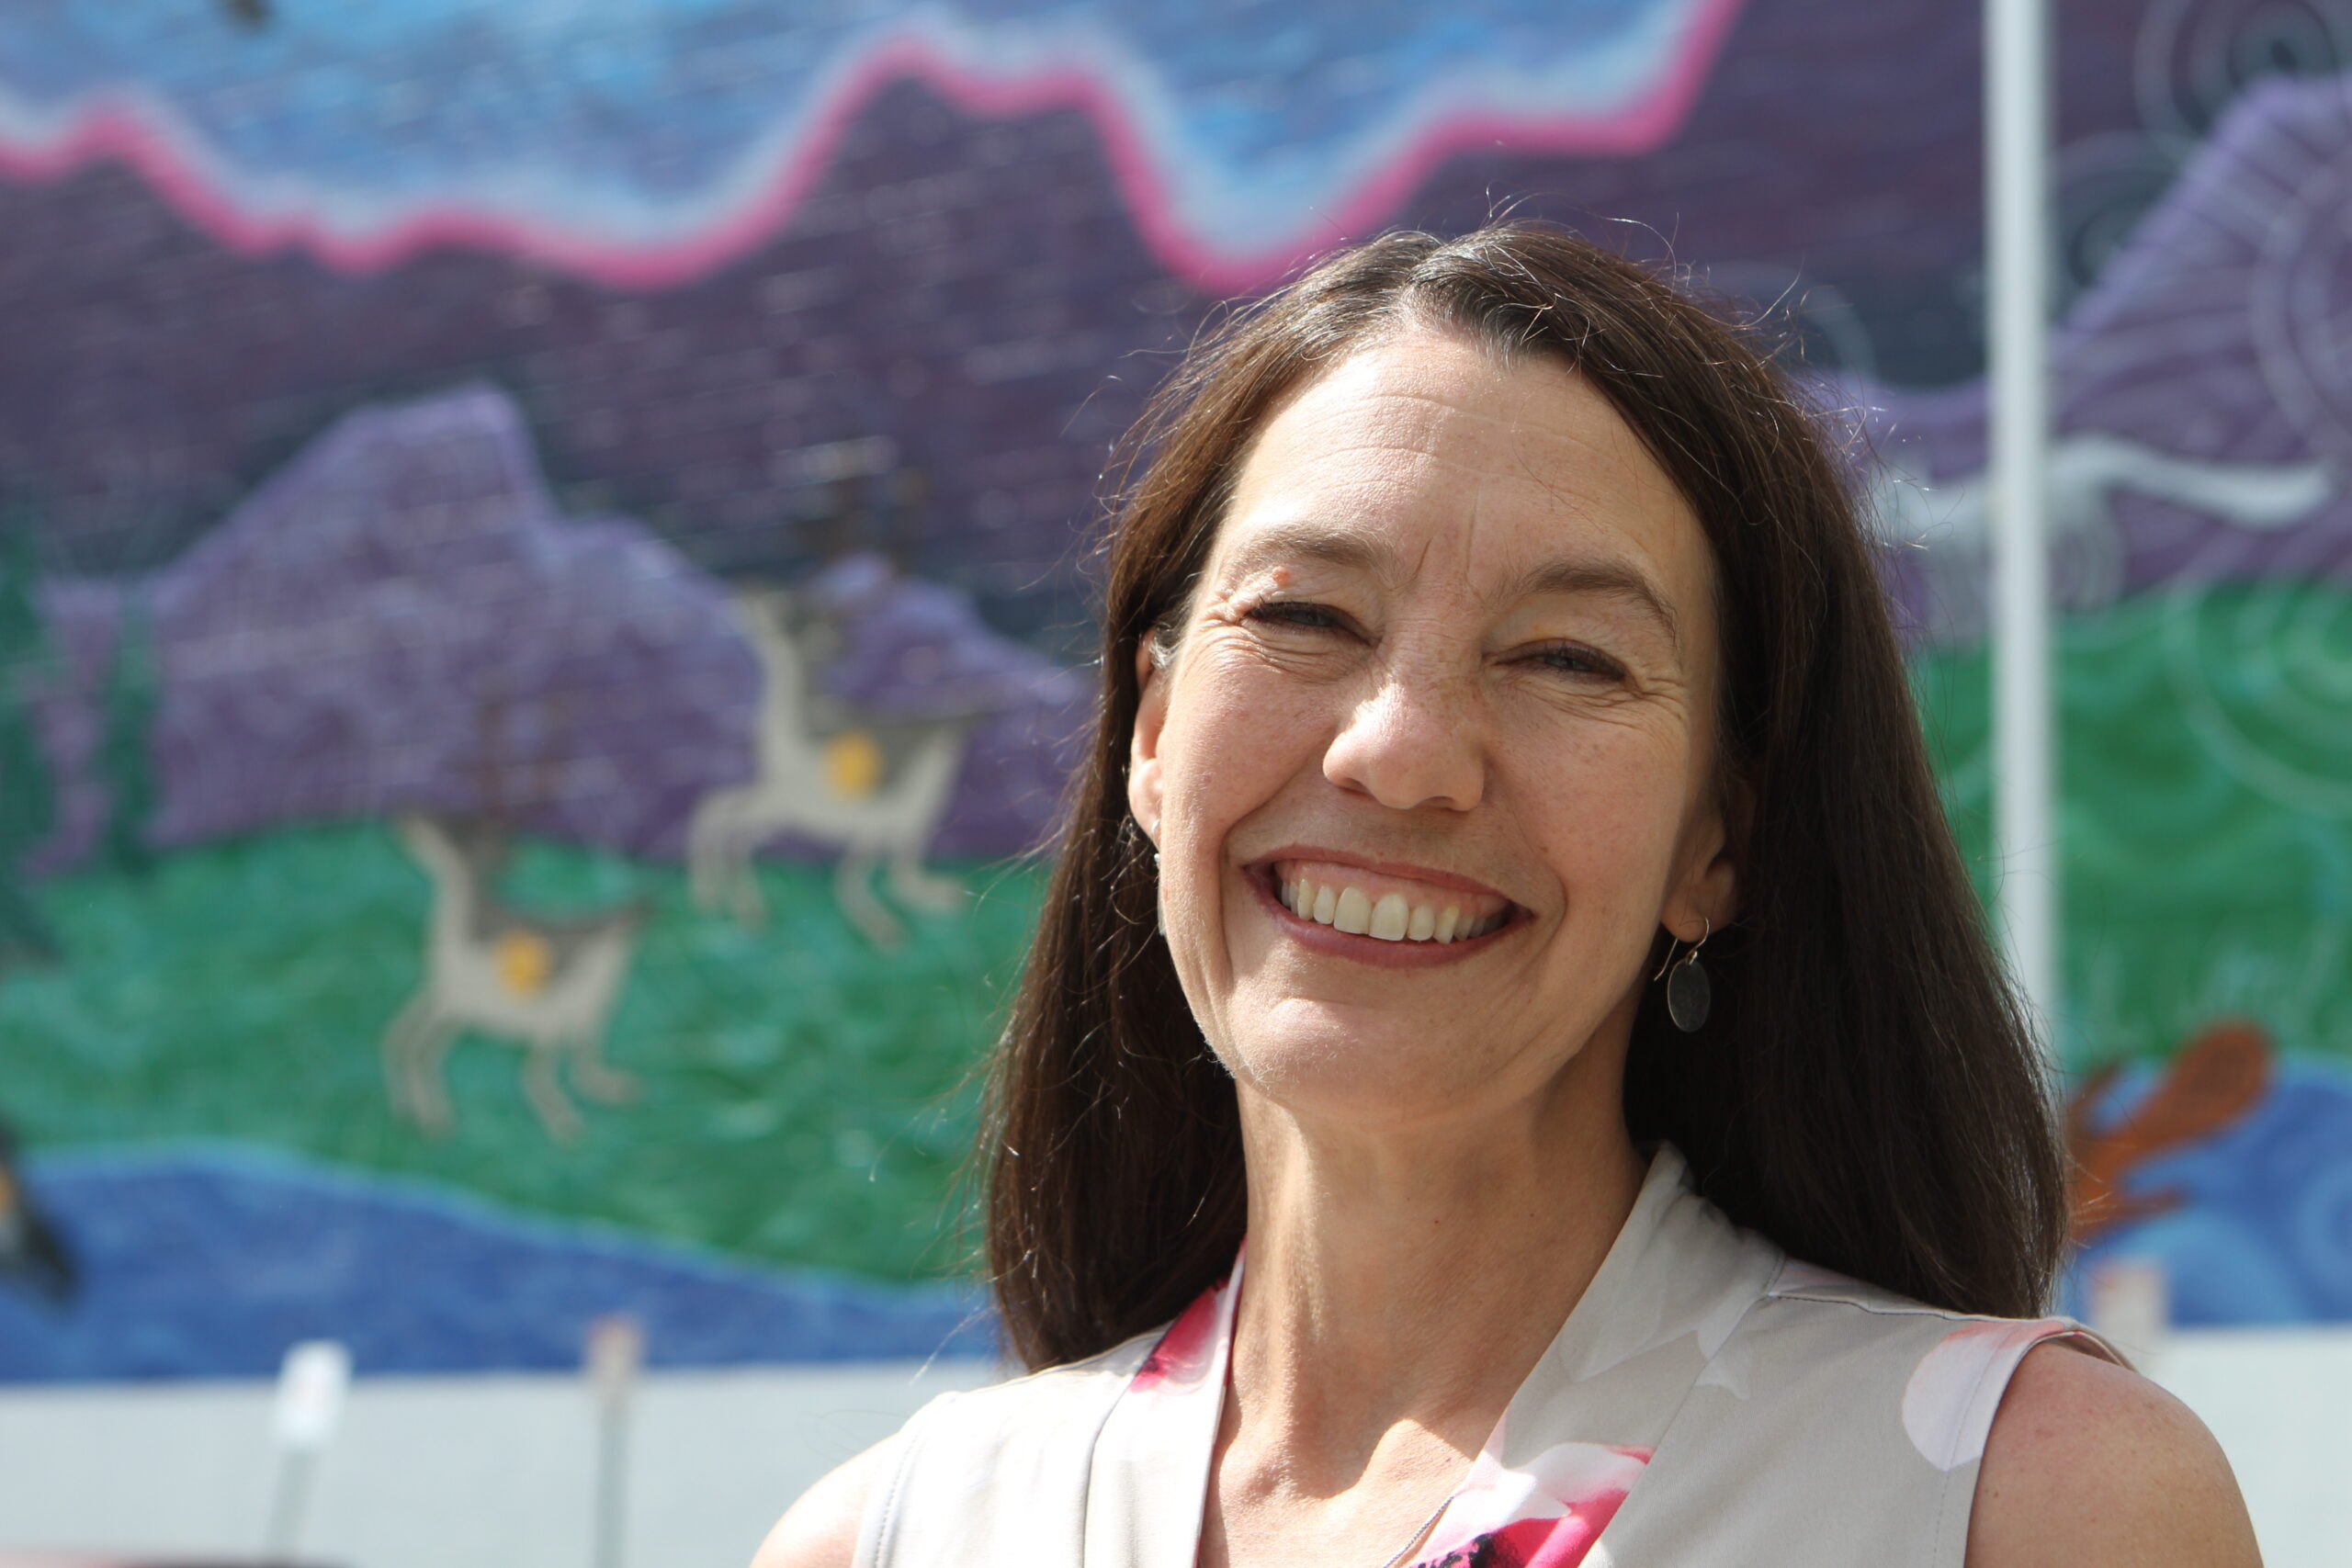 a woman smiles in front of a mural